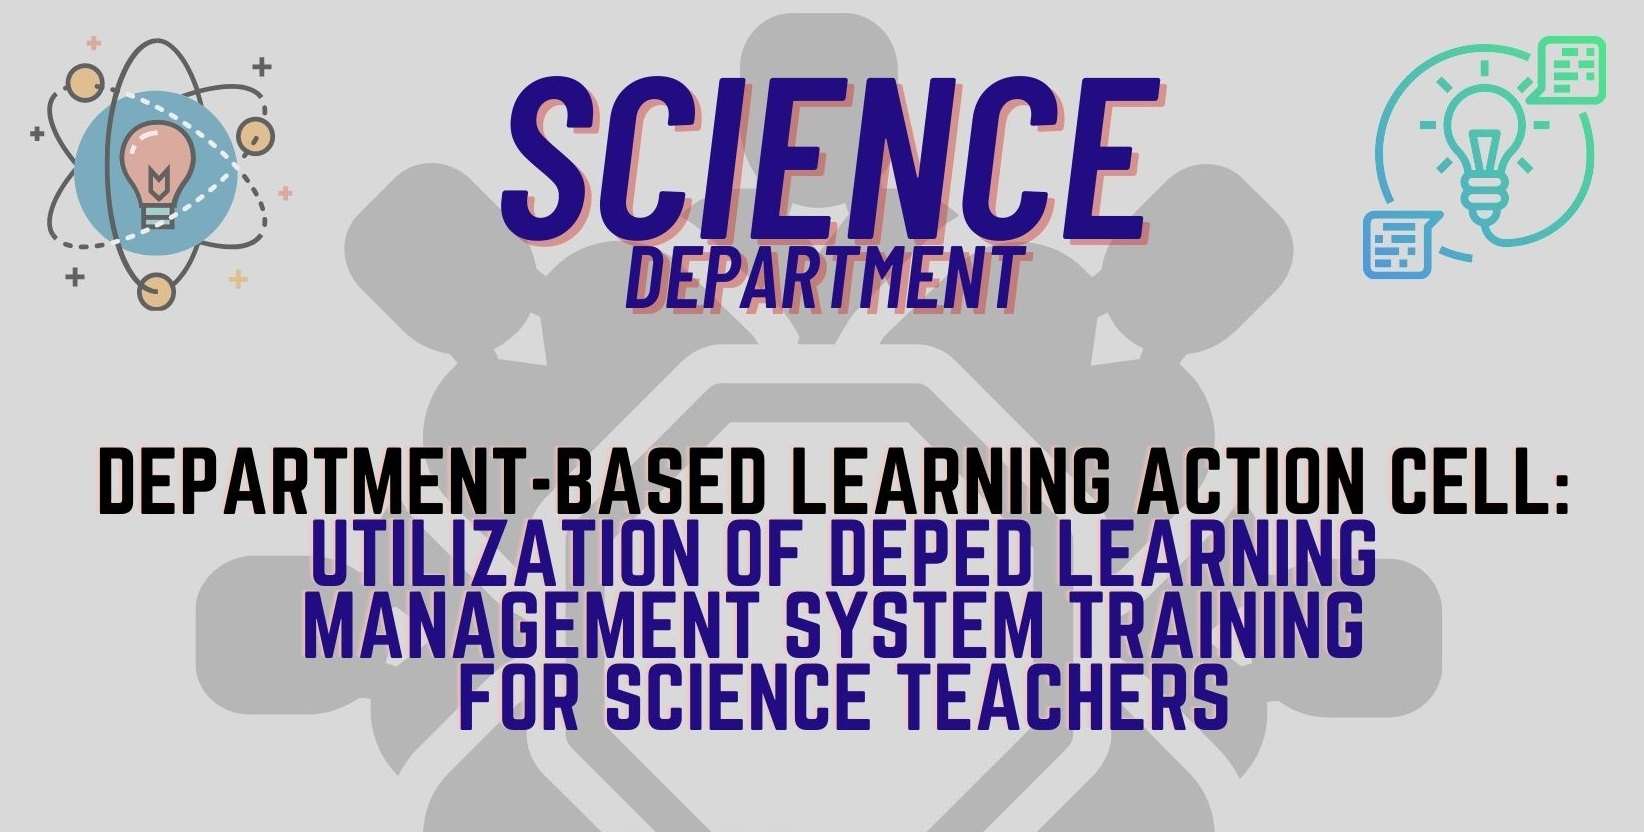 UTILIZATION OF DEPED LEARNING MANAGEMENT SYSTEM TRAINING FOR SCIENCE TEACHERS